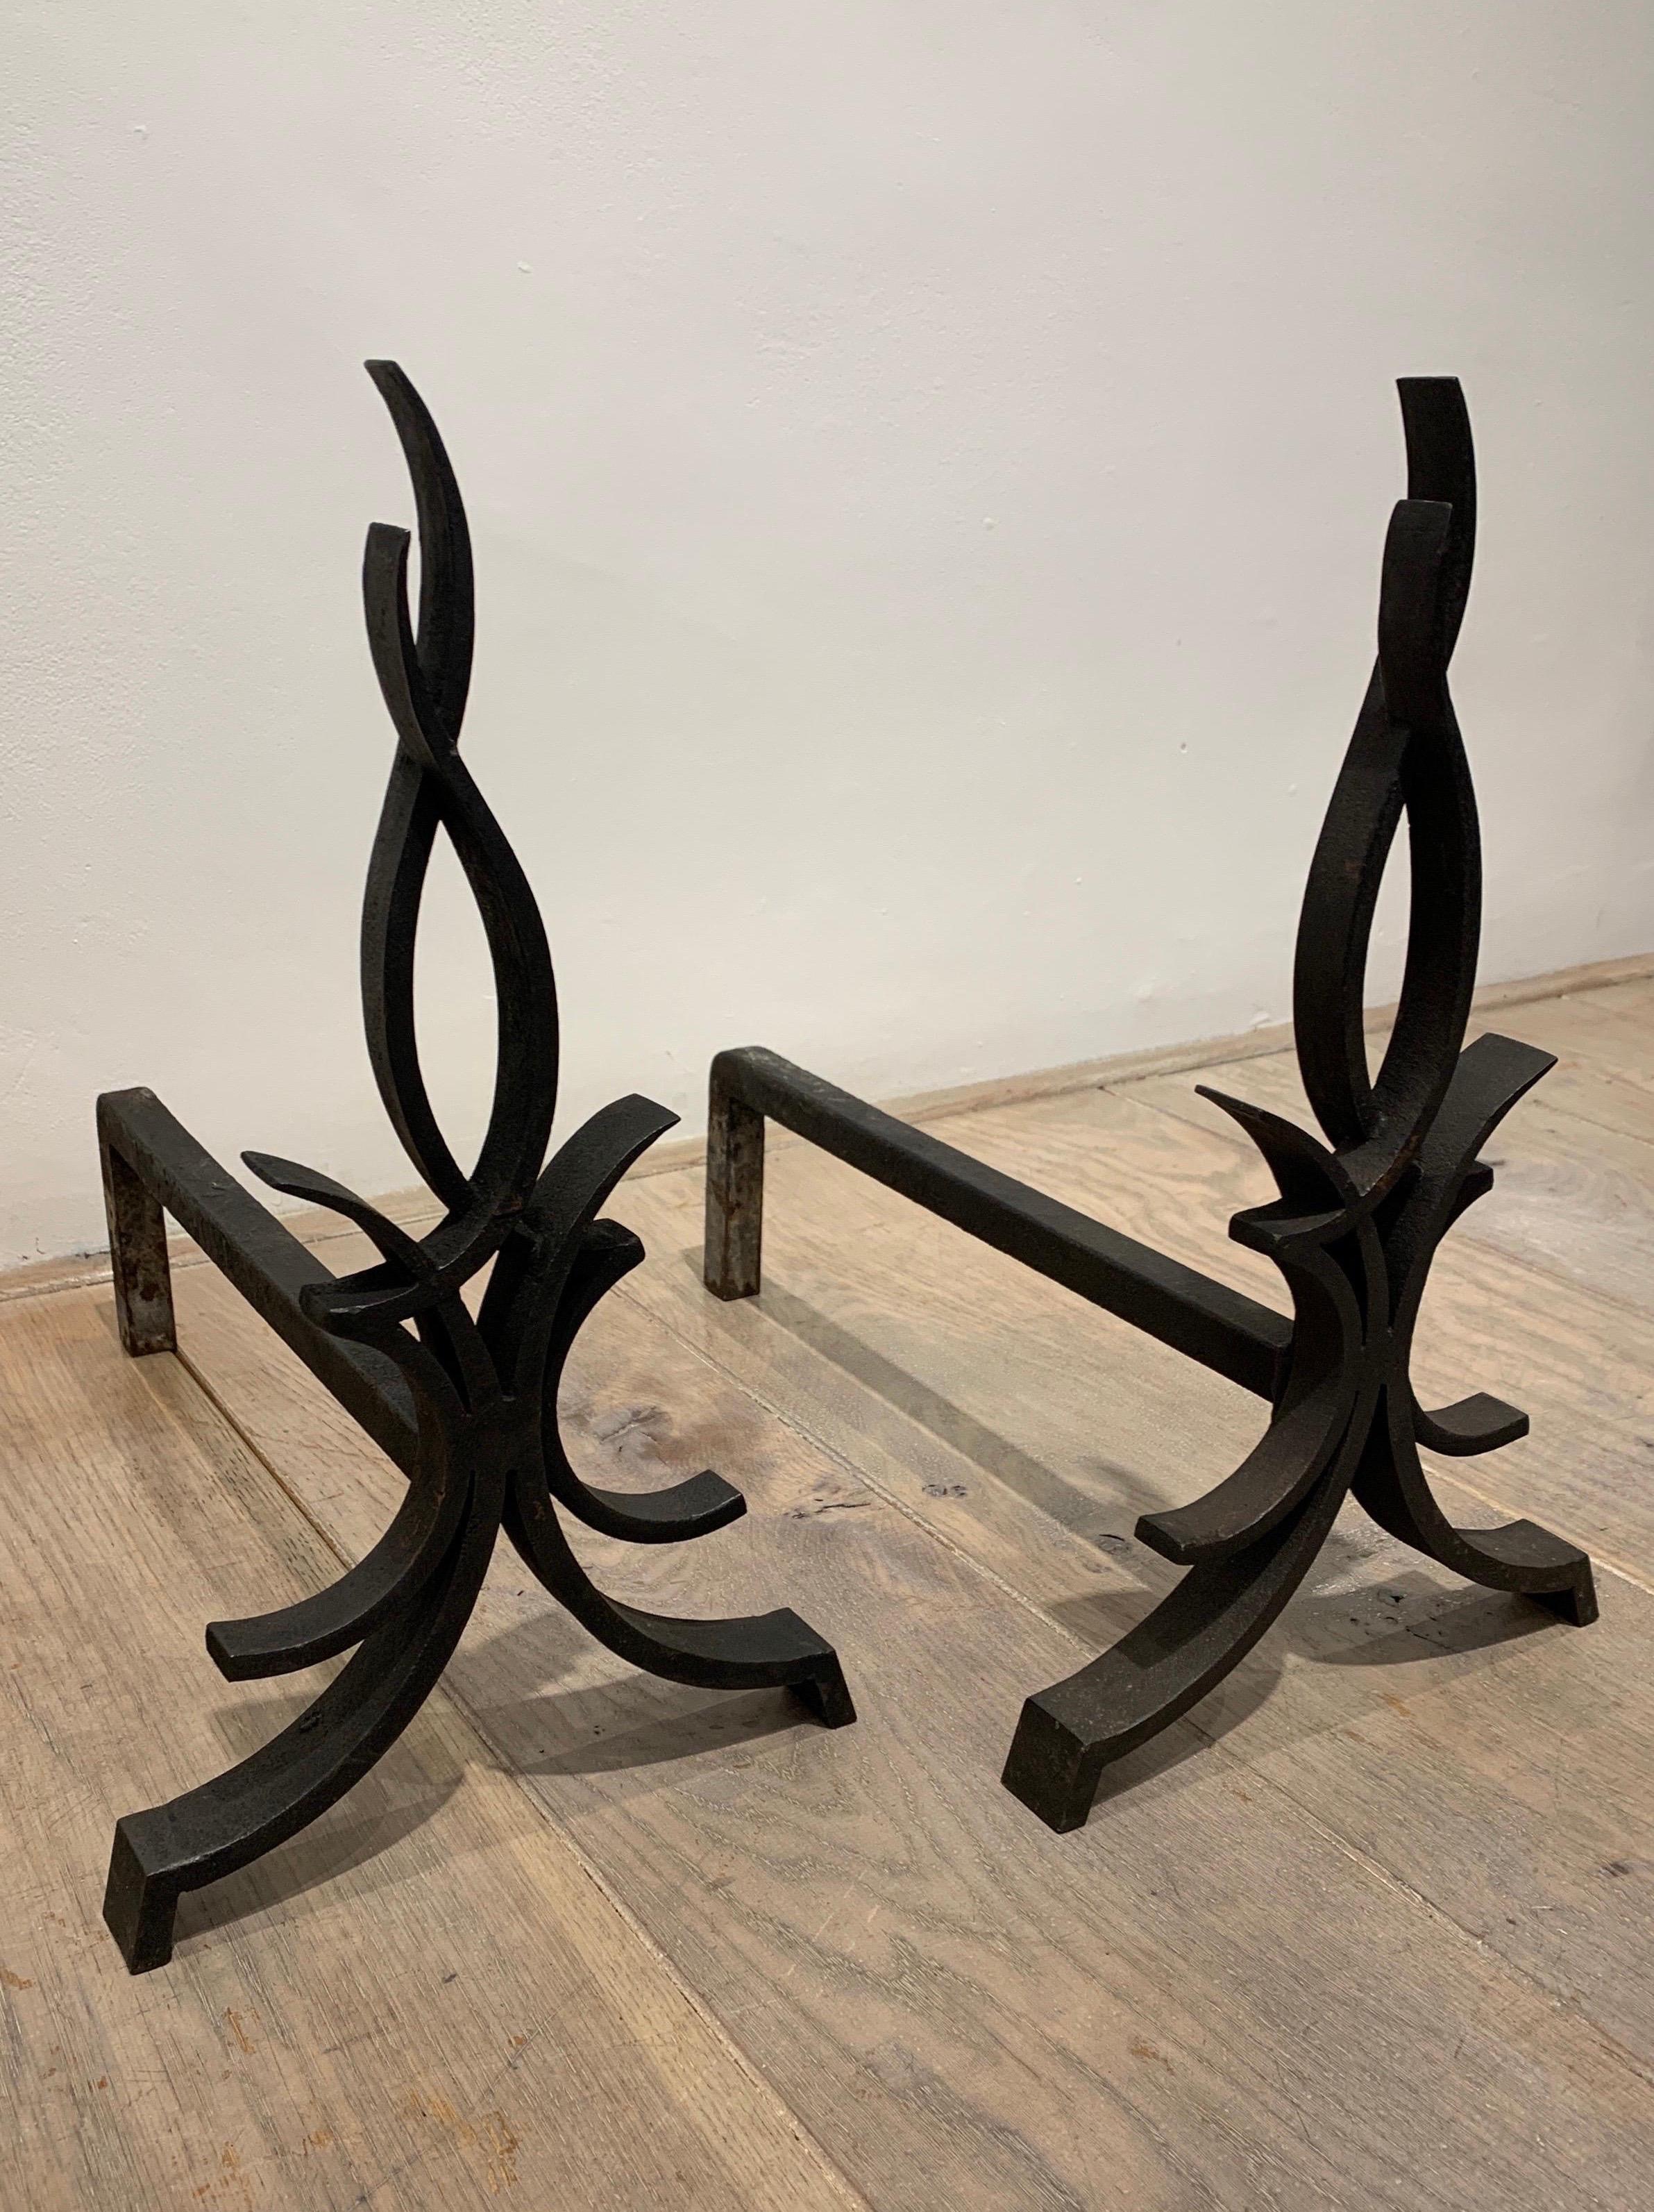 The present pair is made of wrought iron. It represents a stylised flame in the style of the famous Art Deco wrought Iron master Raymond Subes.